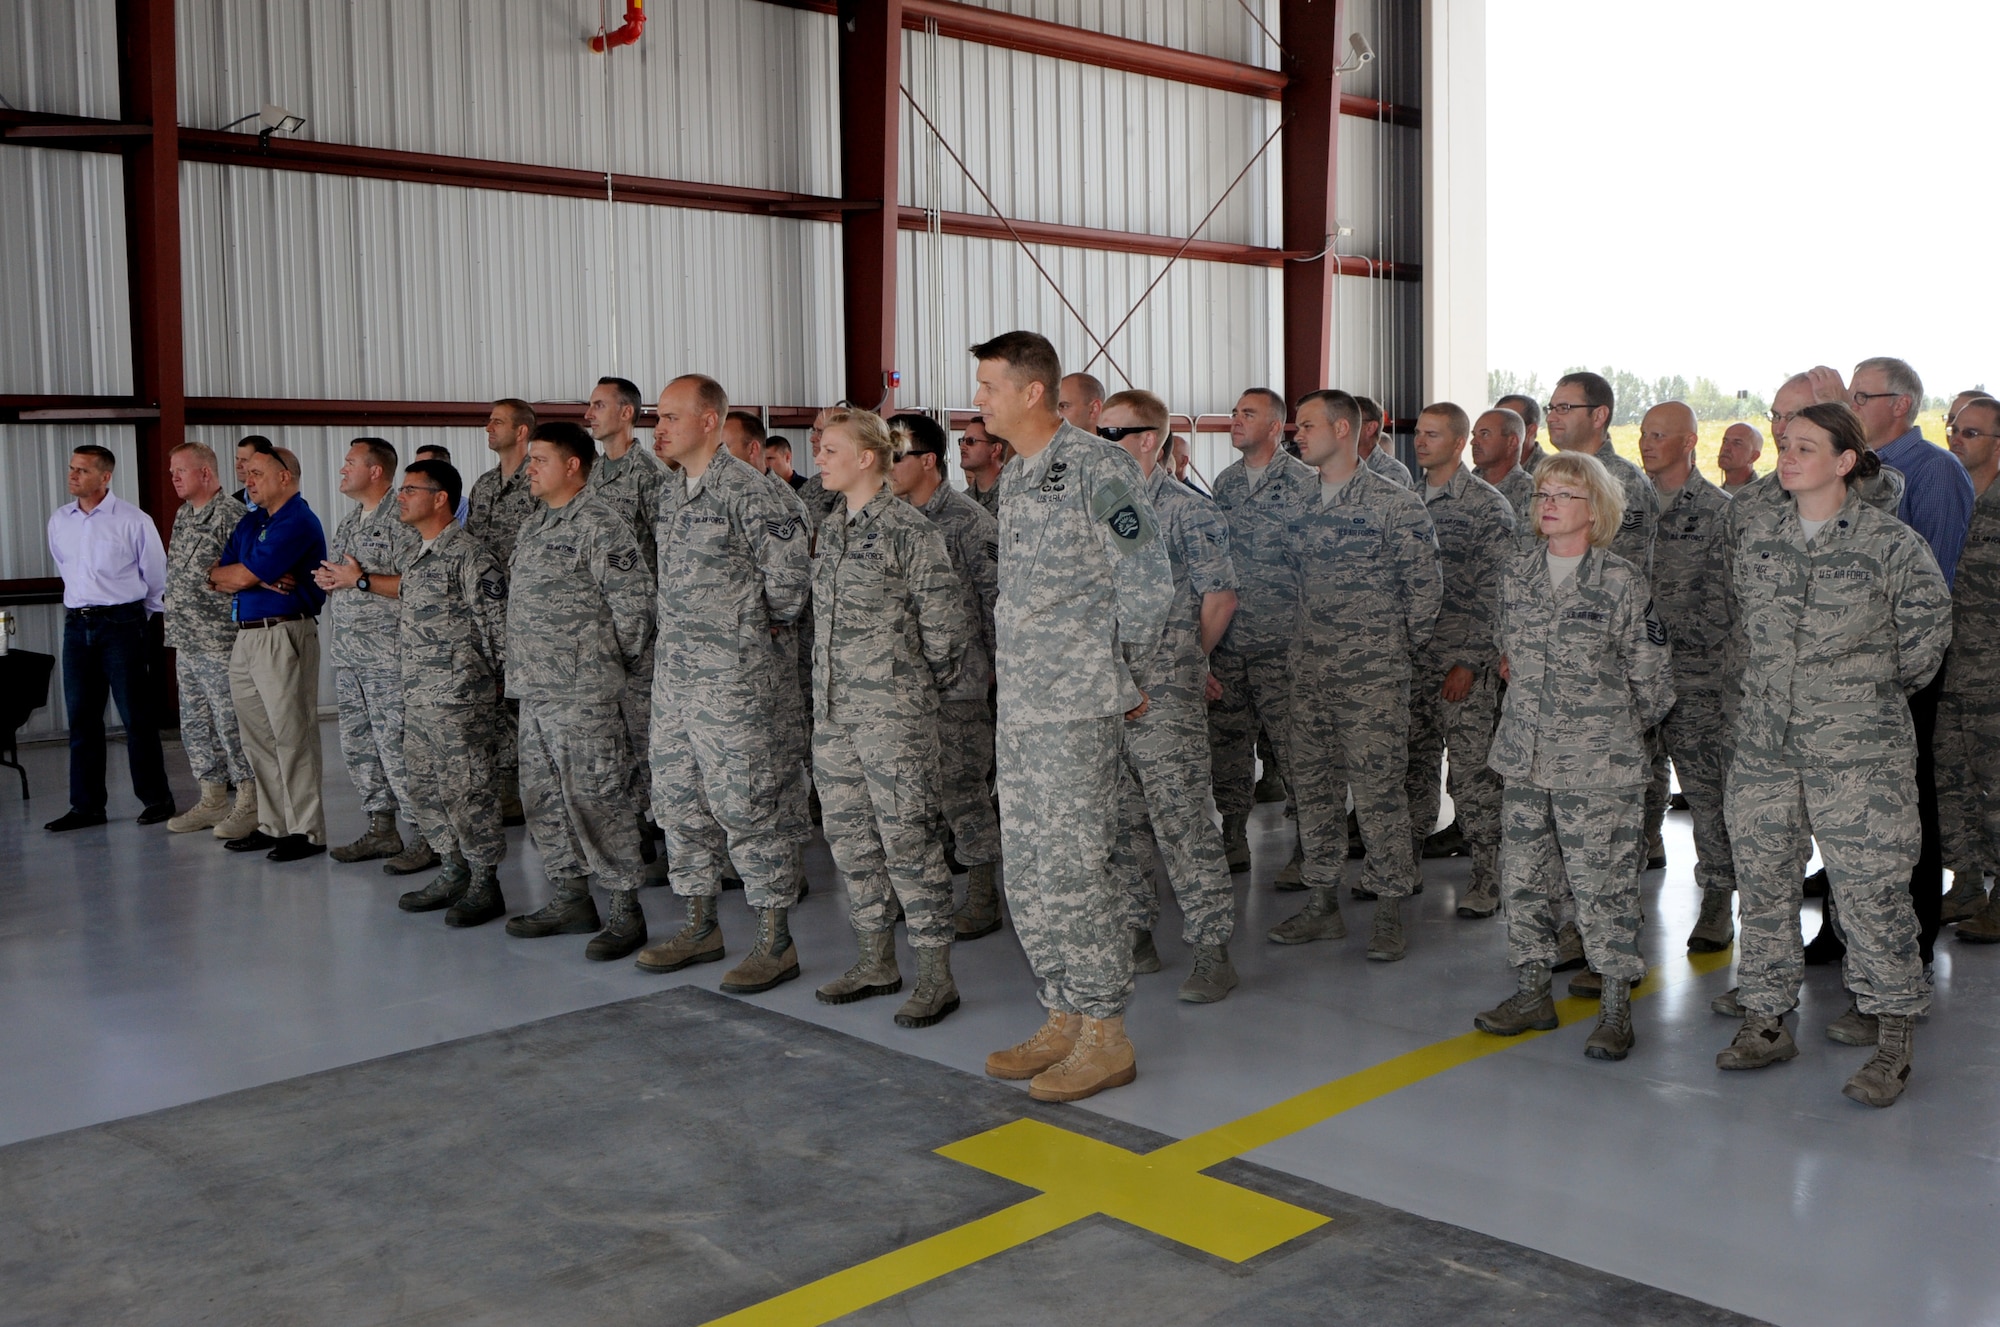 Attendees and staff of the Portland Air National Guard Base, Ore., listen to remarks during the official ribbon cutting ceremony for a new alert barn on base July 10, 2015. (U.S. Air National Guard photo by Tech. Sgt. John Hughel, 142nd Fighter Wing Public Affairs/Released)